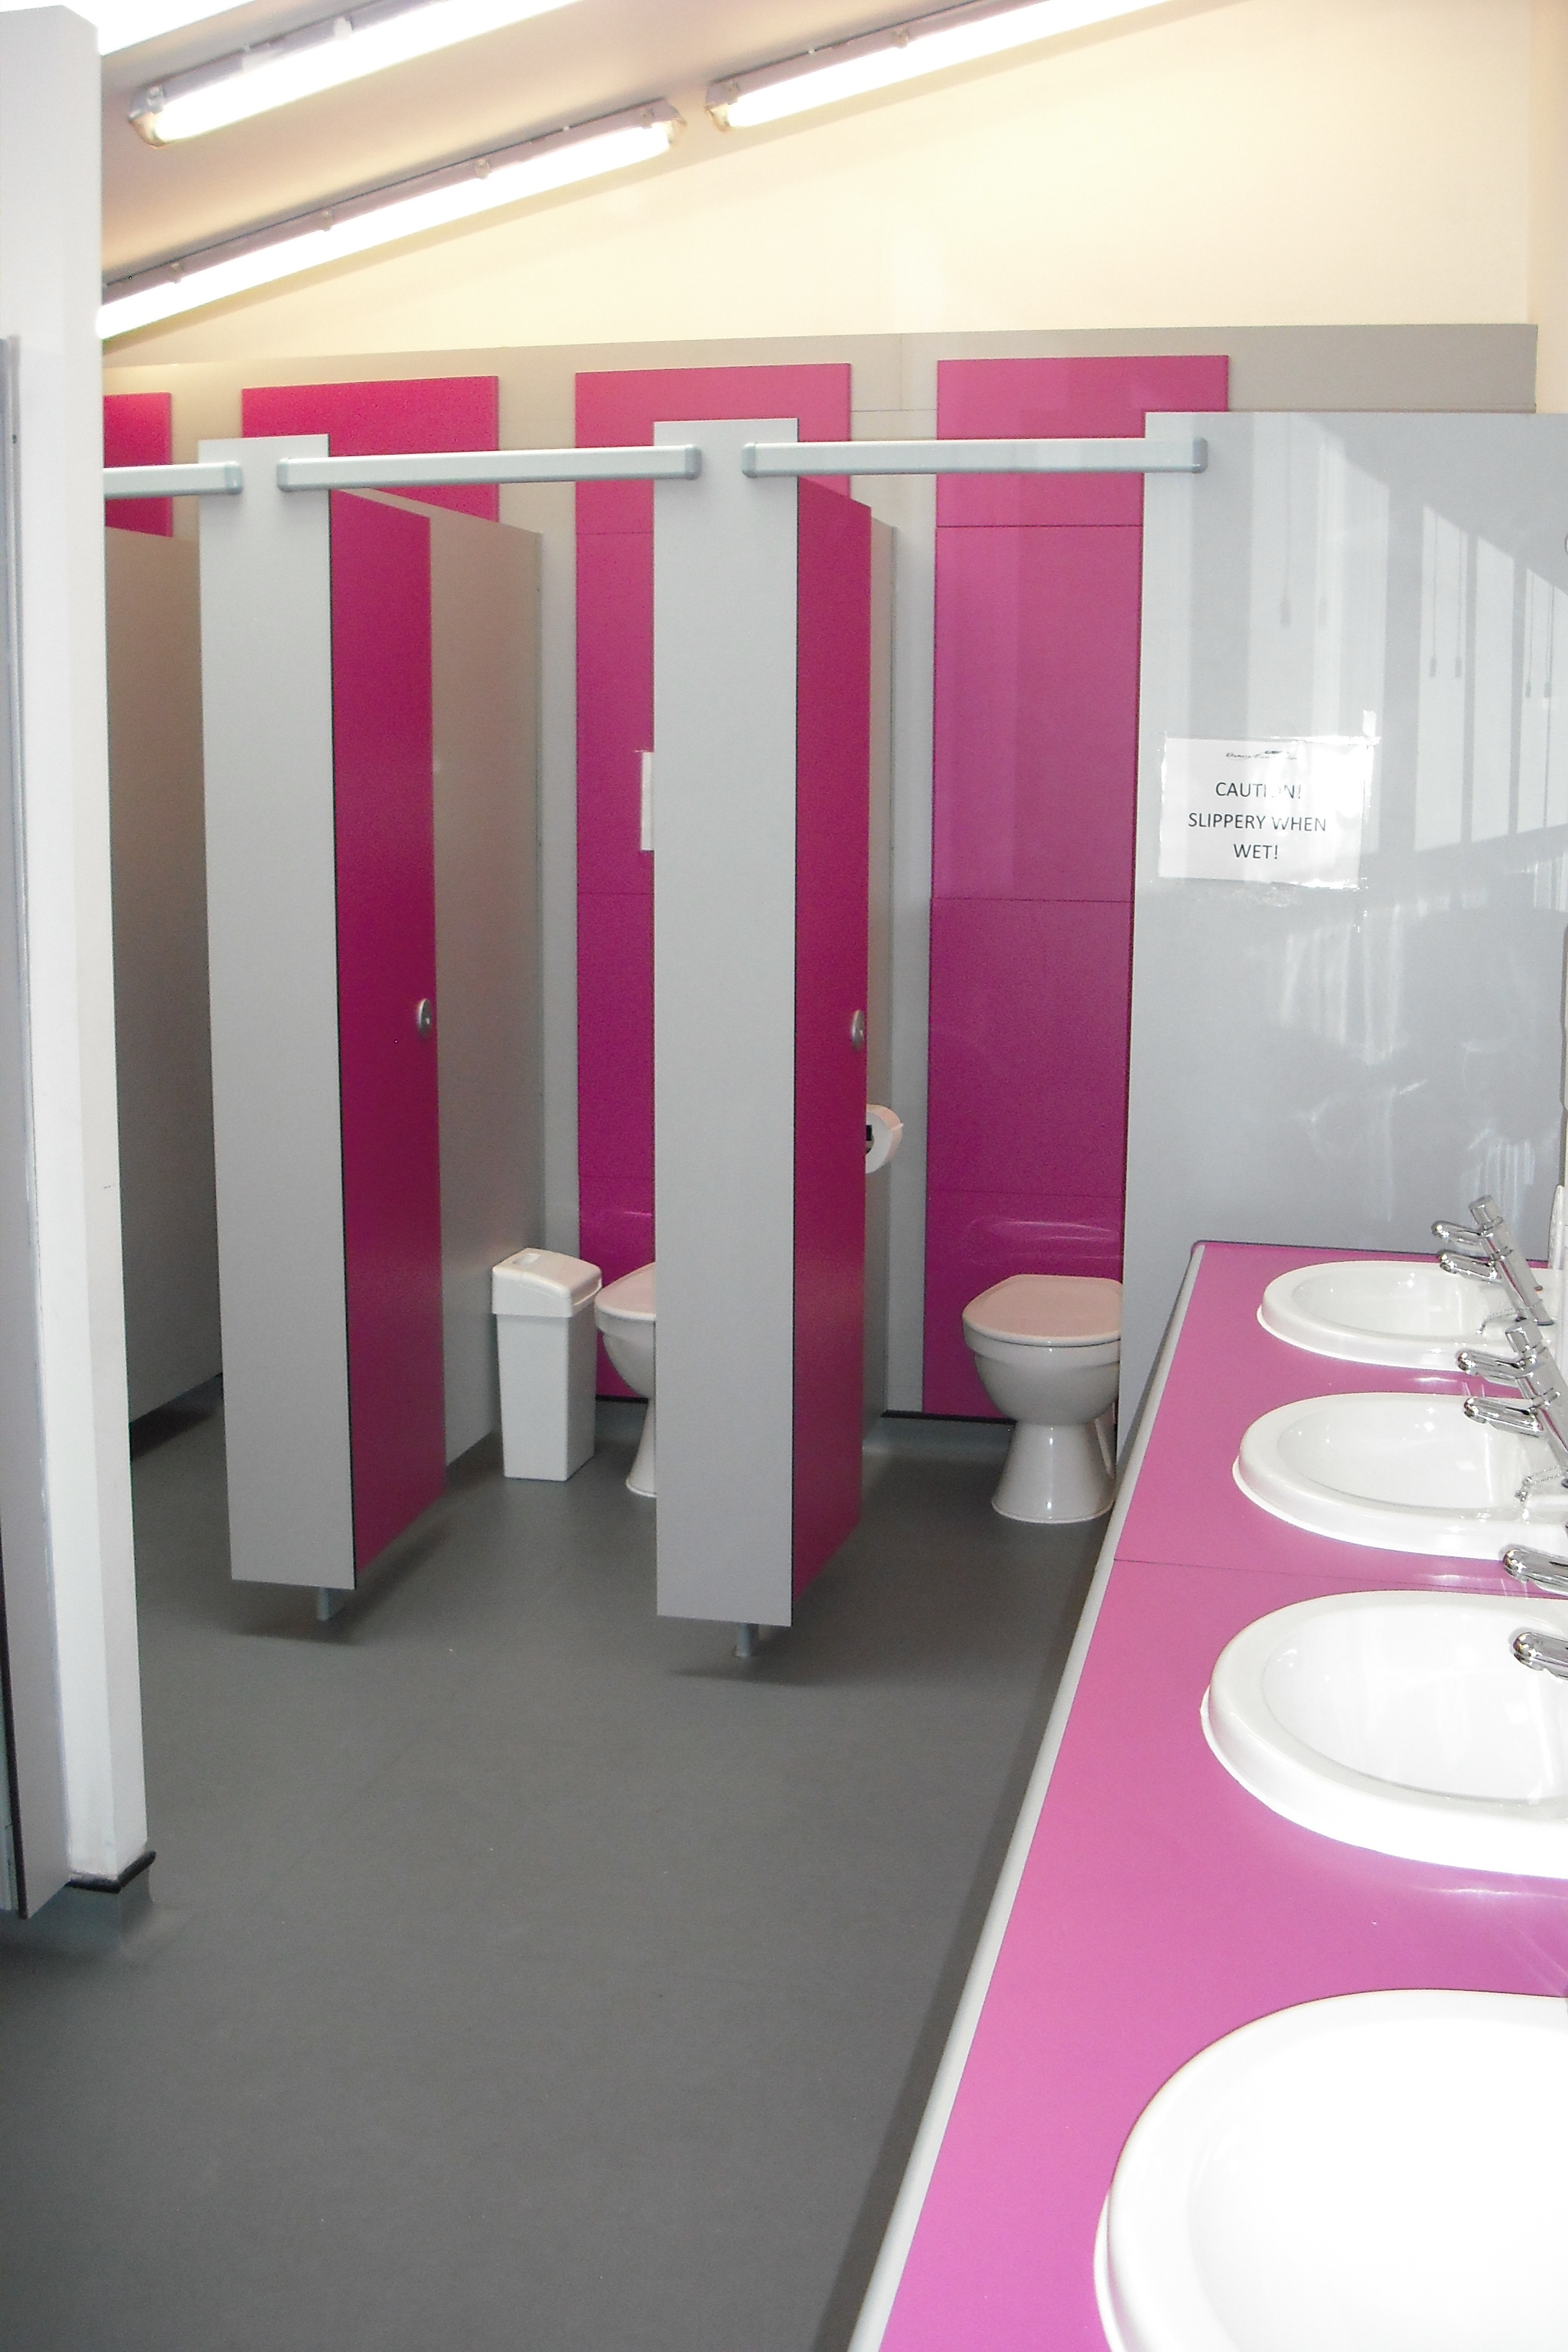 Ladies Changing room and Toilet